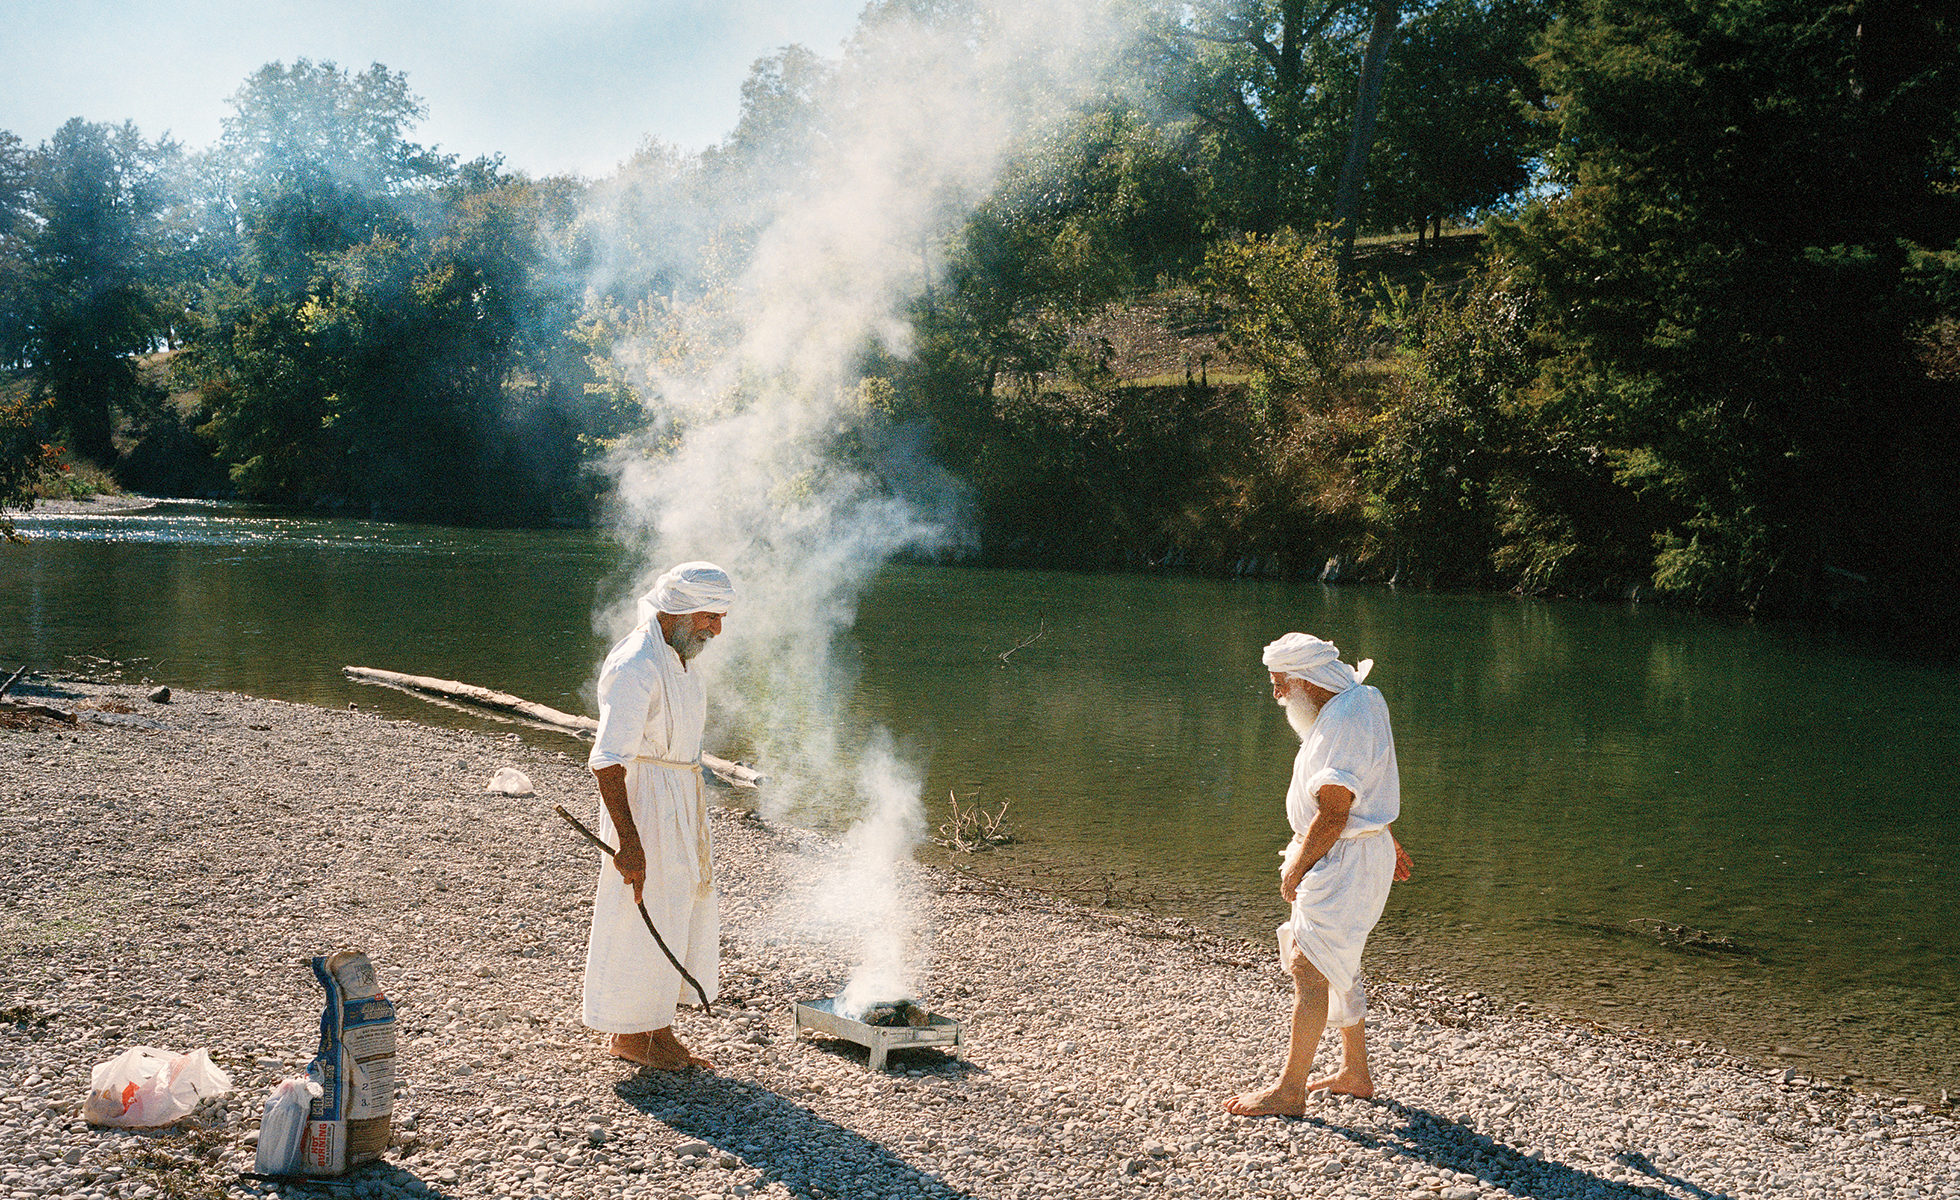 Shahram Ebadfardzadeh, left, and Hormoz Ebadeh Ahvazi prepare a fire during a day of remembrance at the Guadalupe River near San Antonio. They'll eat while praying for the souls of people who have died.